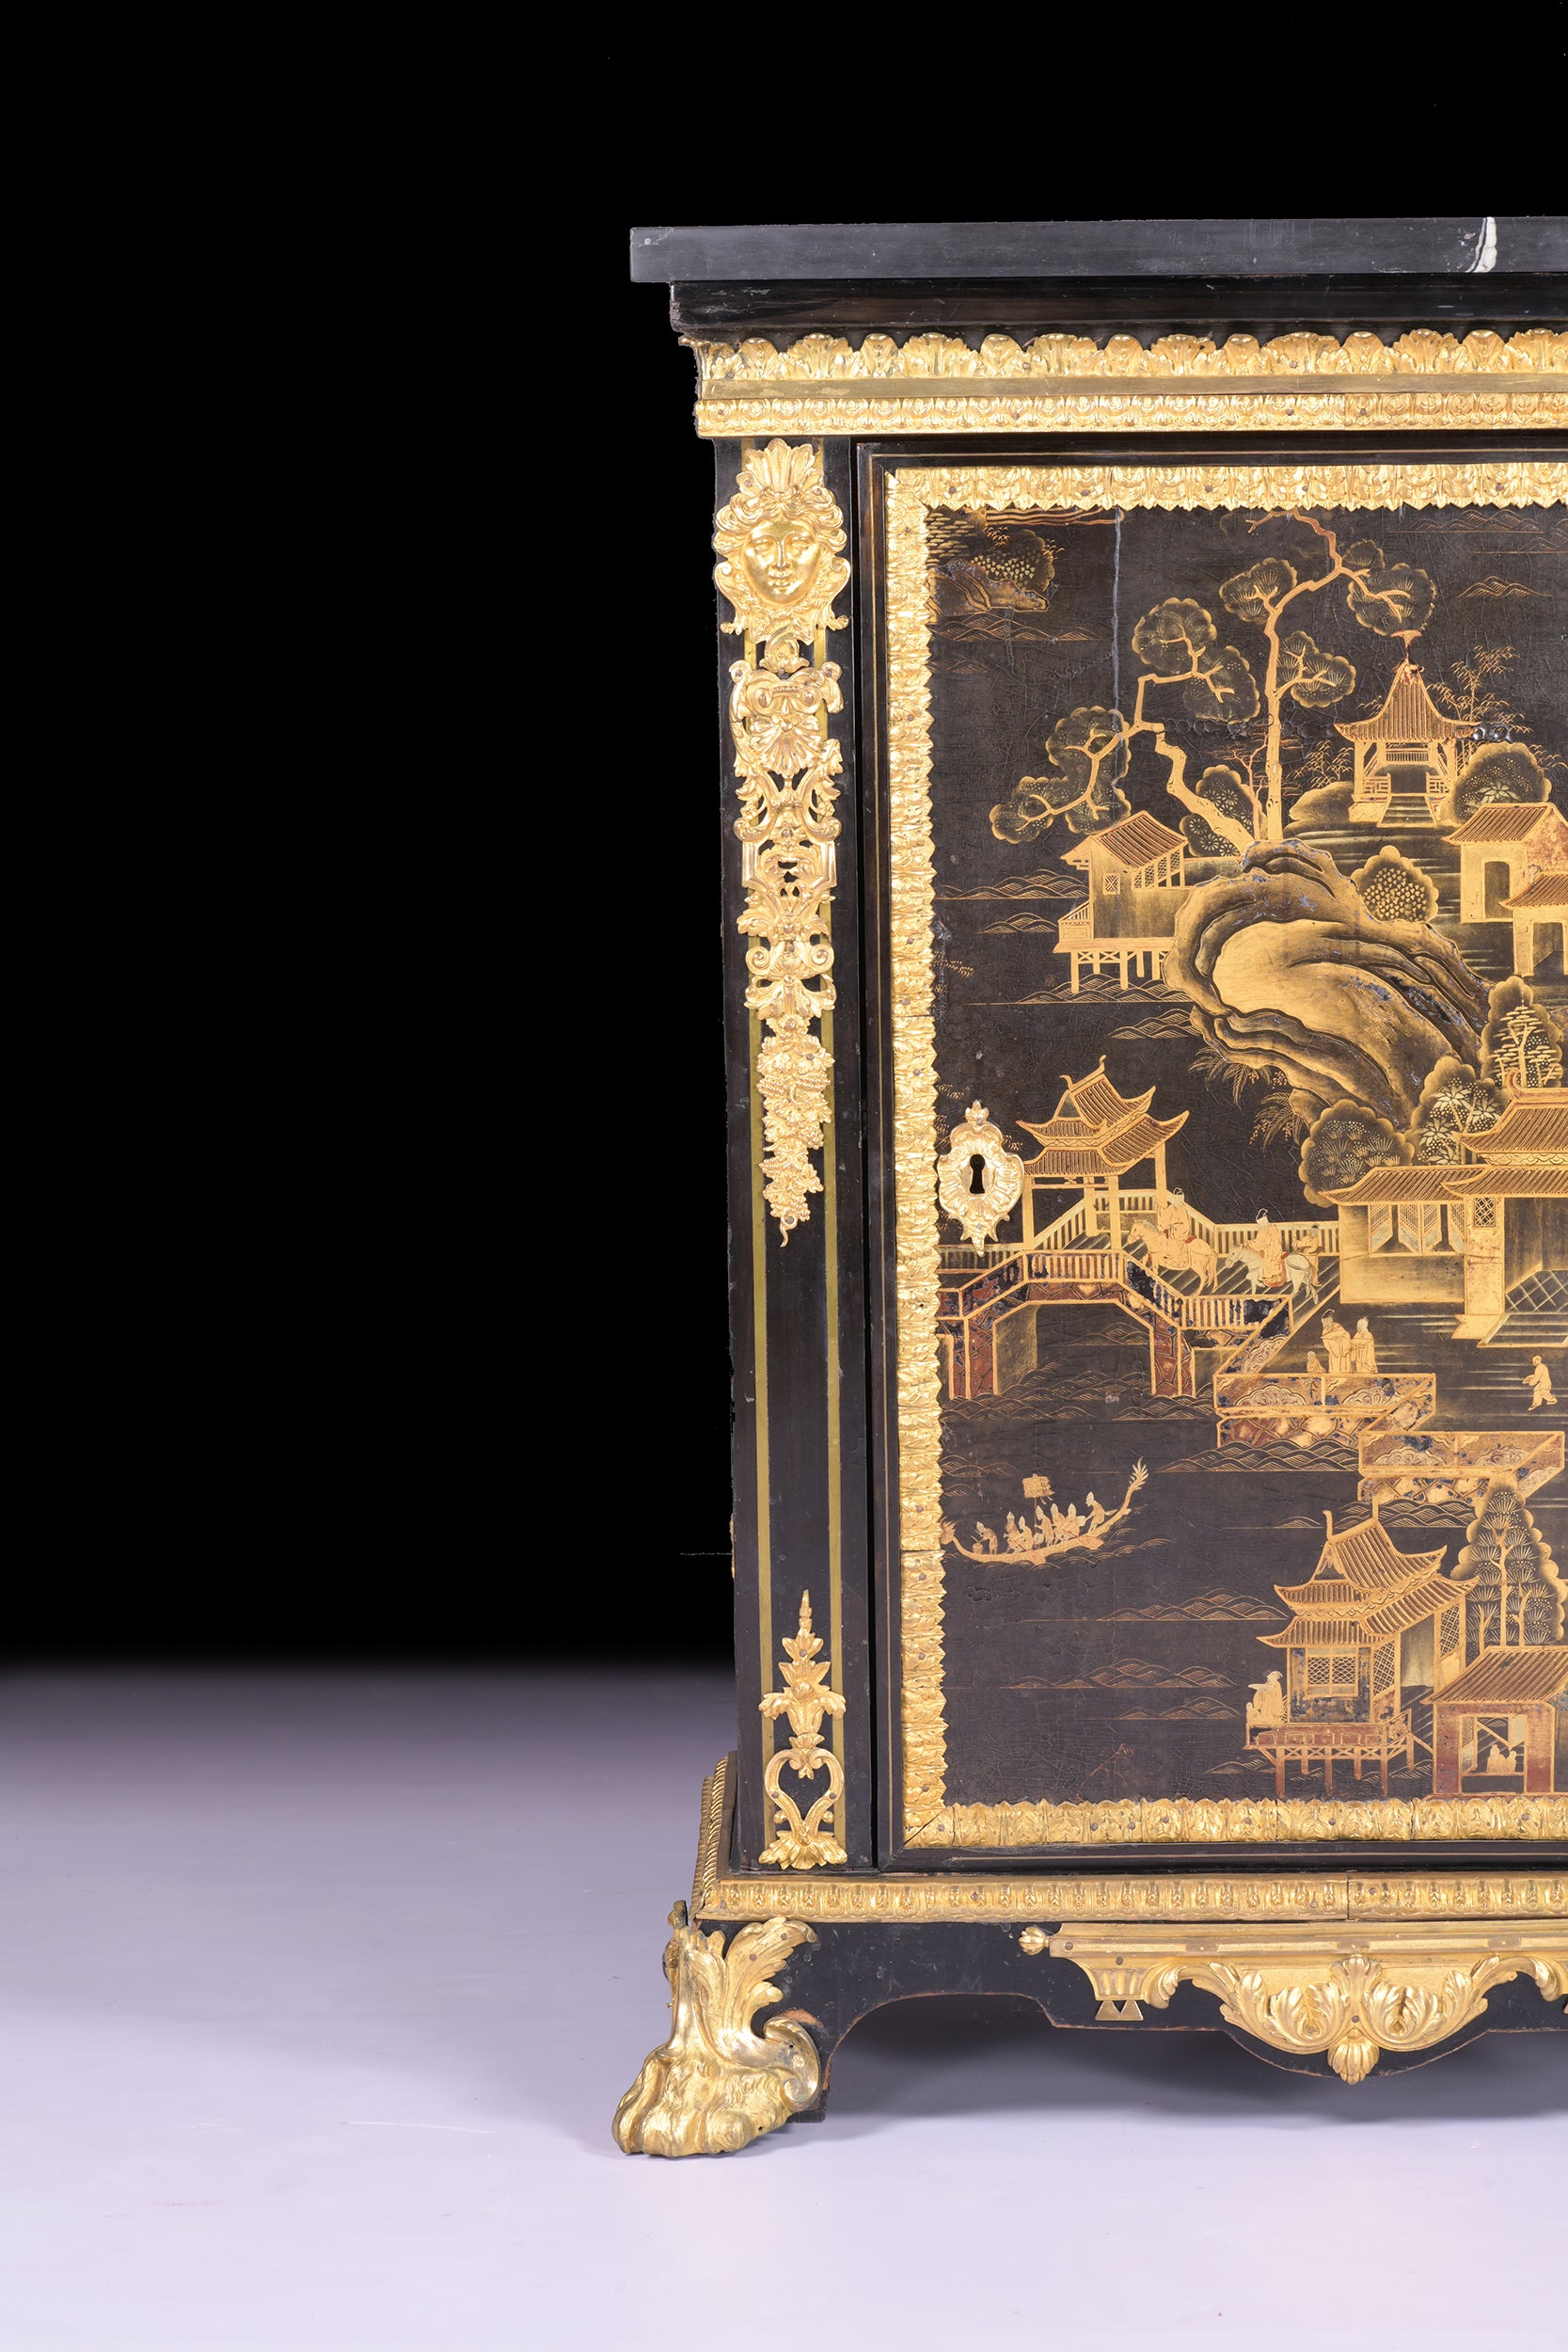 ORMOLU MOUNTED CHINOSERIE SIDE CABINET - REF No. 4039